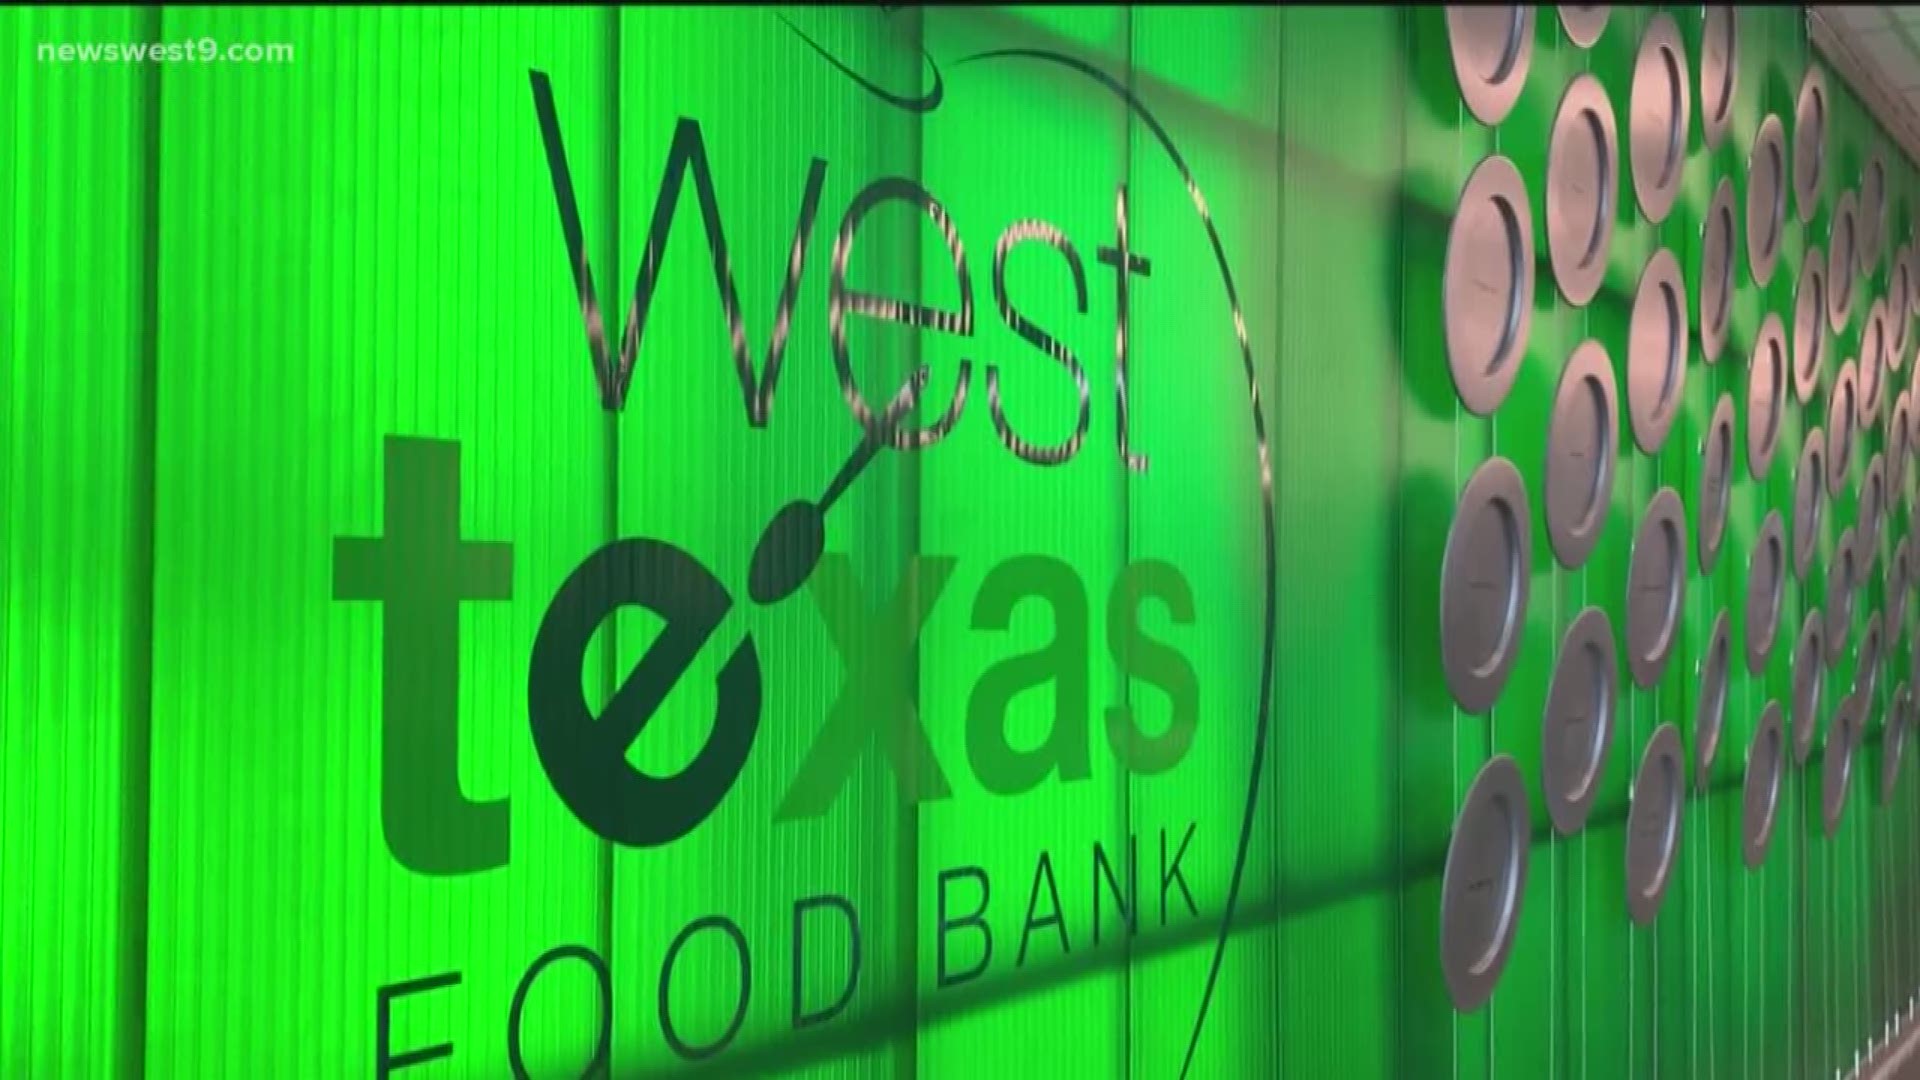 West Texas Food Bank works to provide meals with Food 2 Kids program